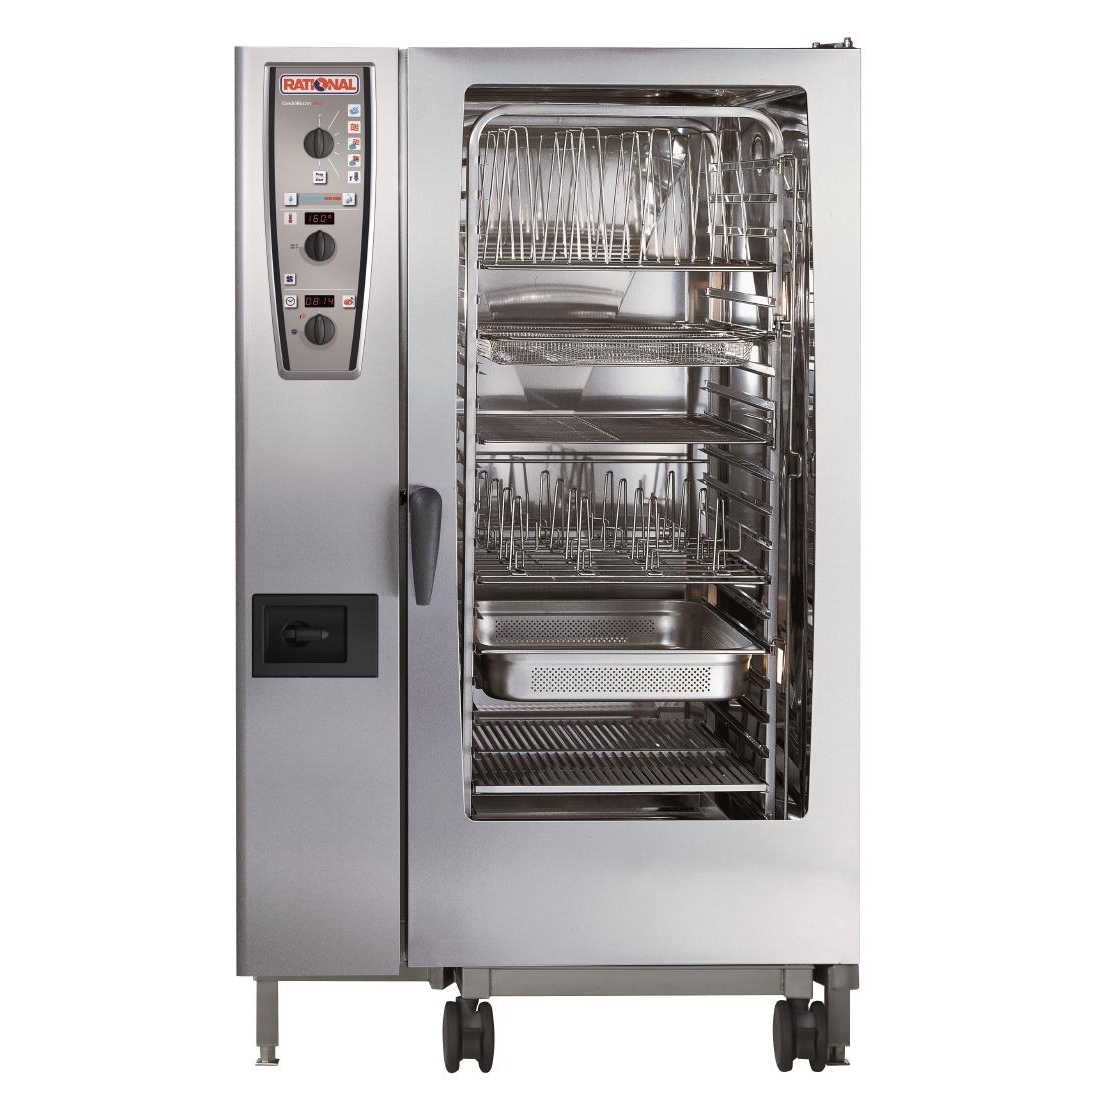 Rational Combimaster Plus Oven 201 Natural Gas